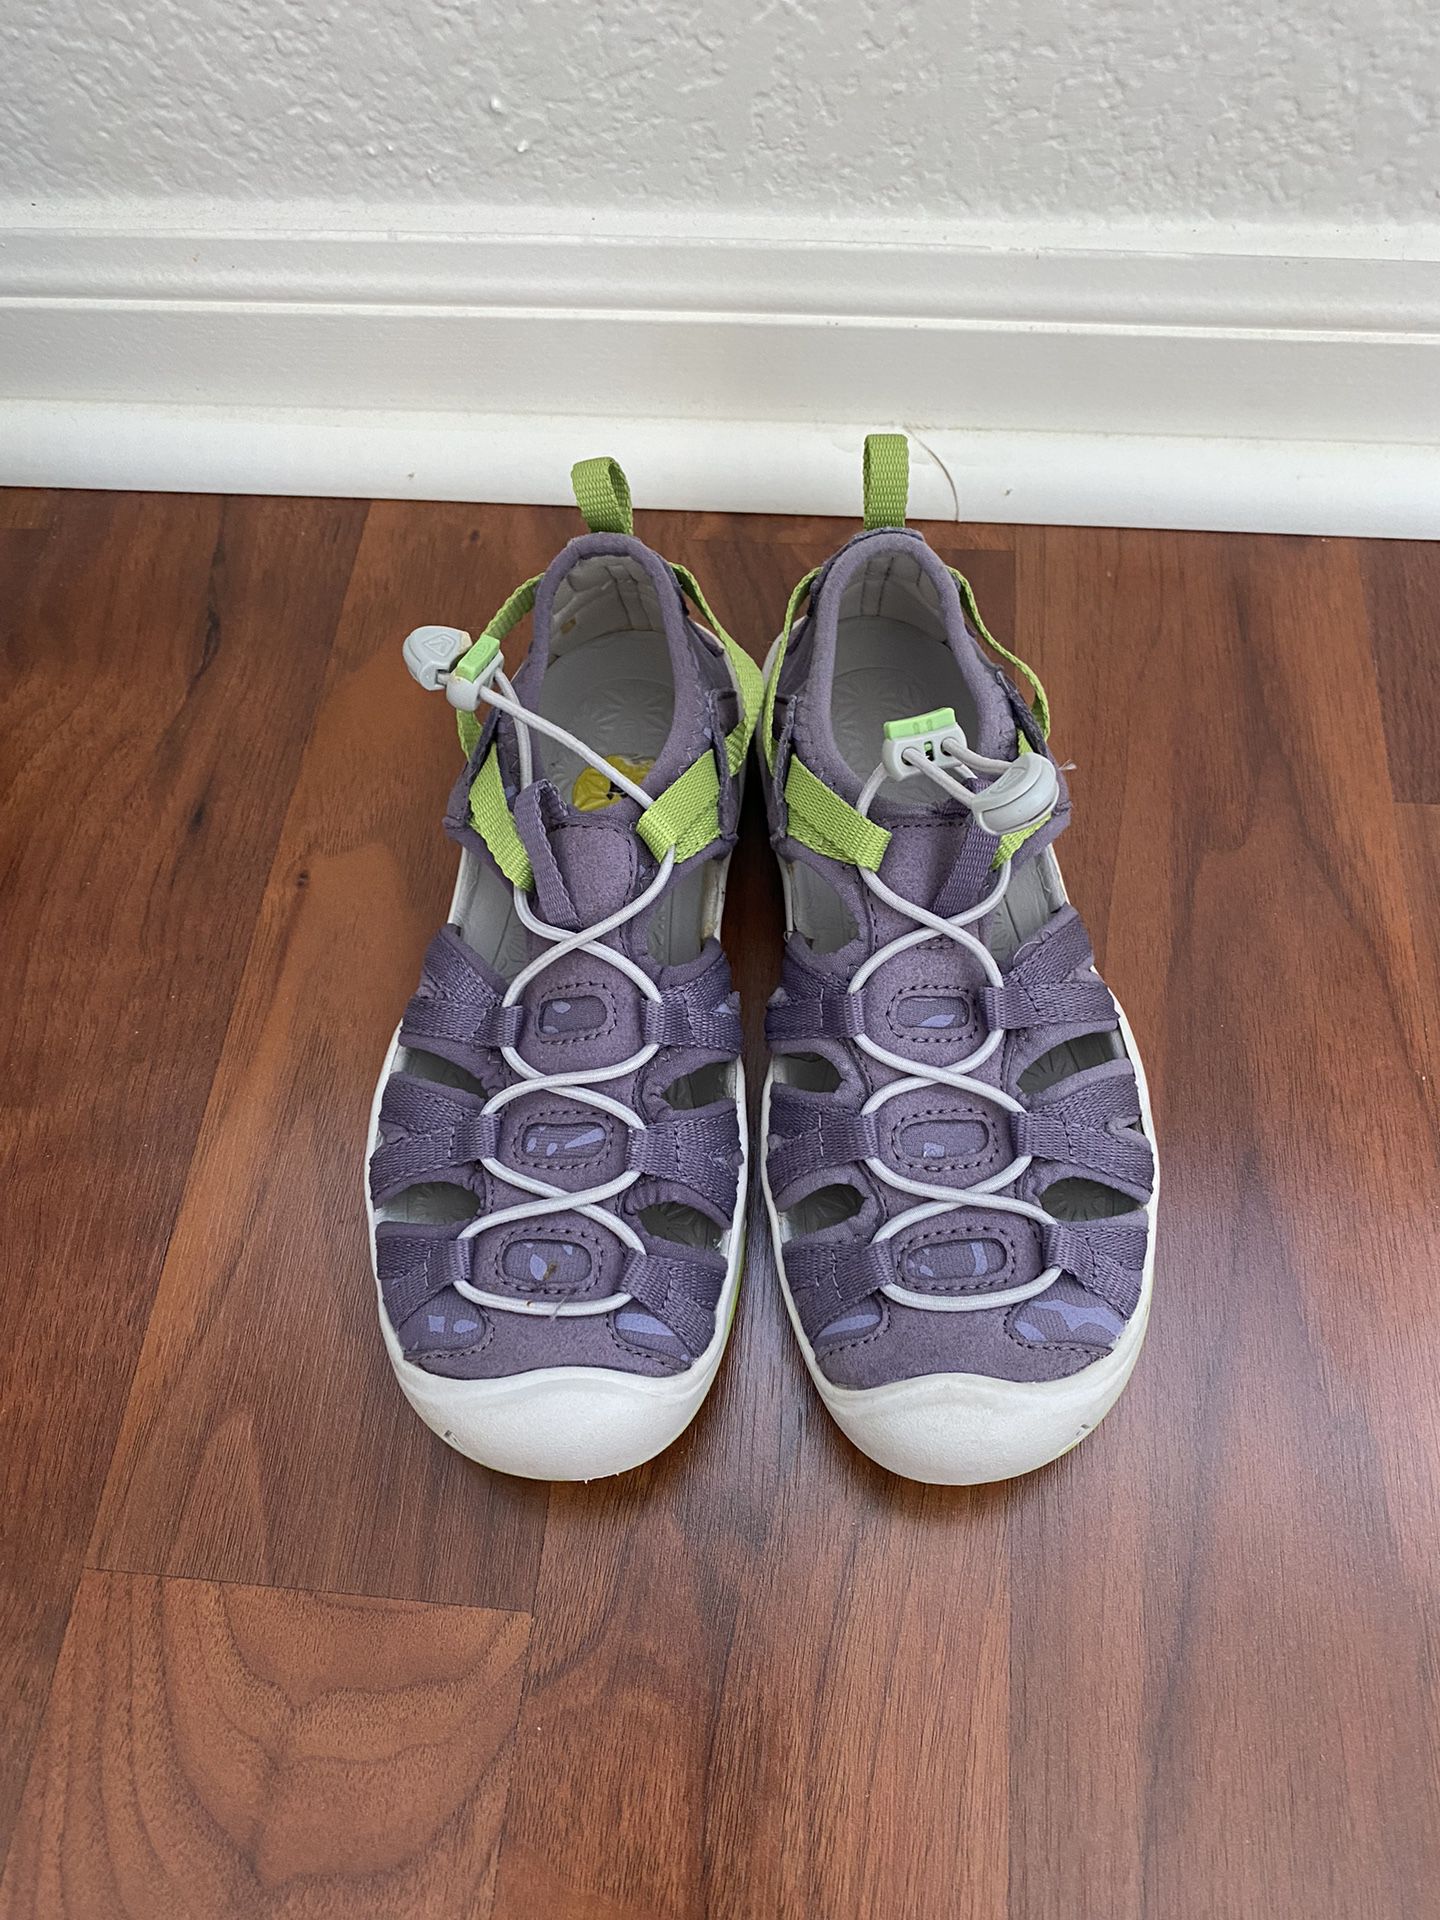 Keen Shoes For Girl Size 1